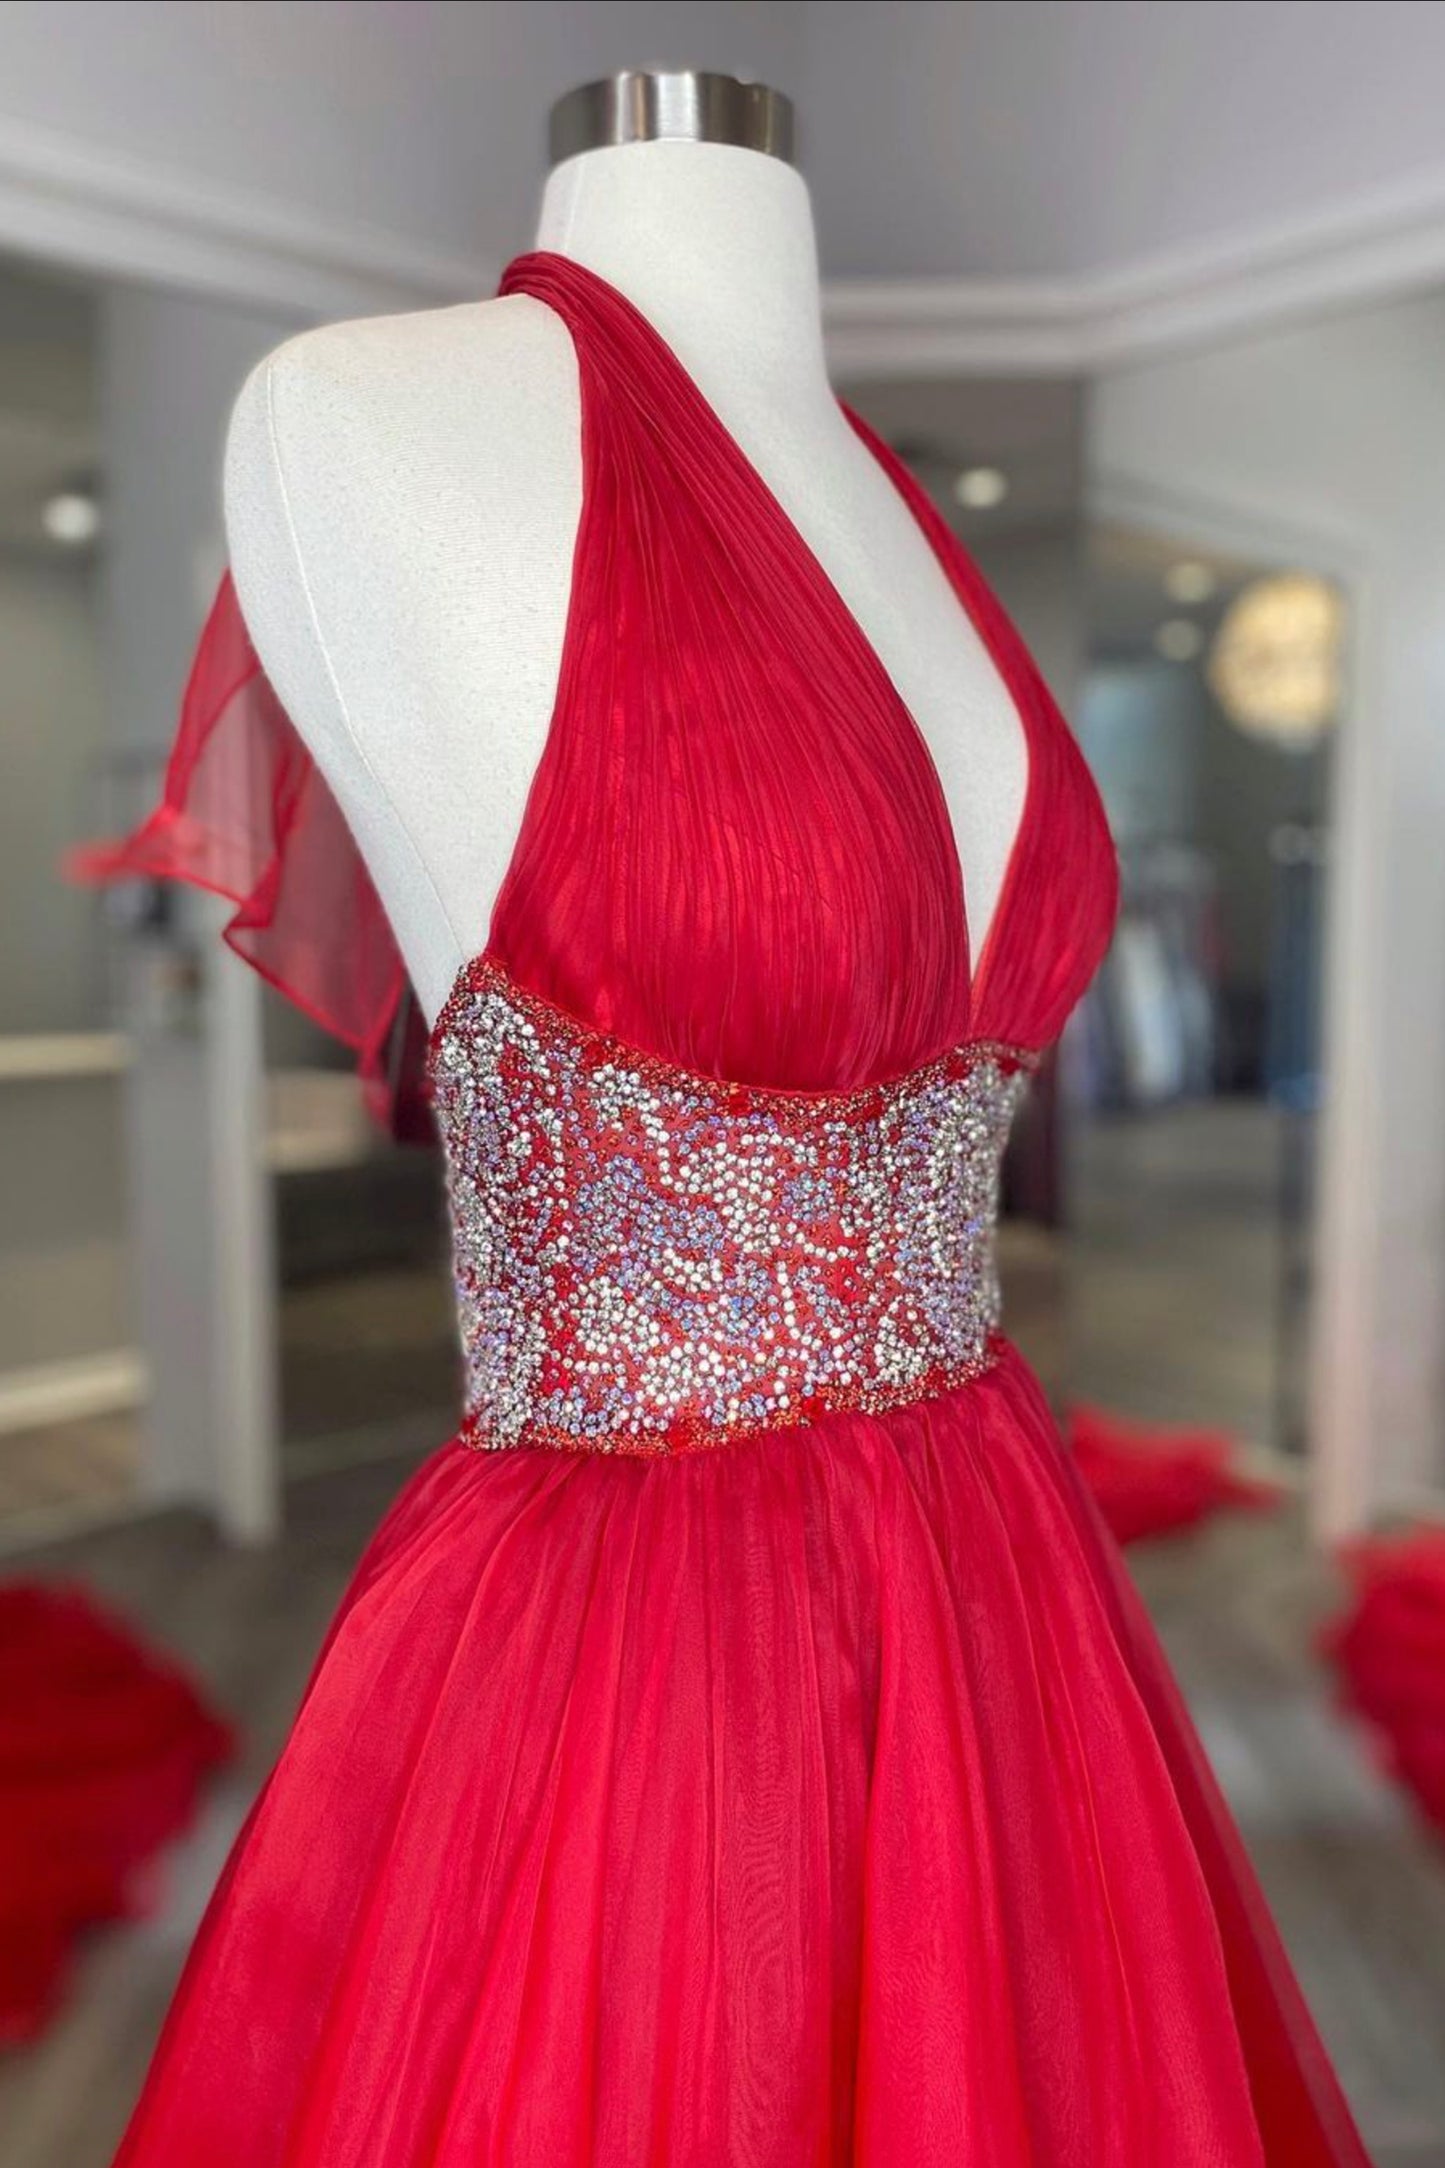 Red Organza Beaded Long A-Line Prom Dress, Red Evening Dress